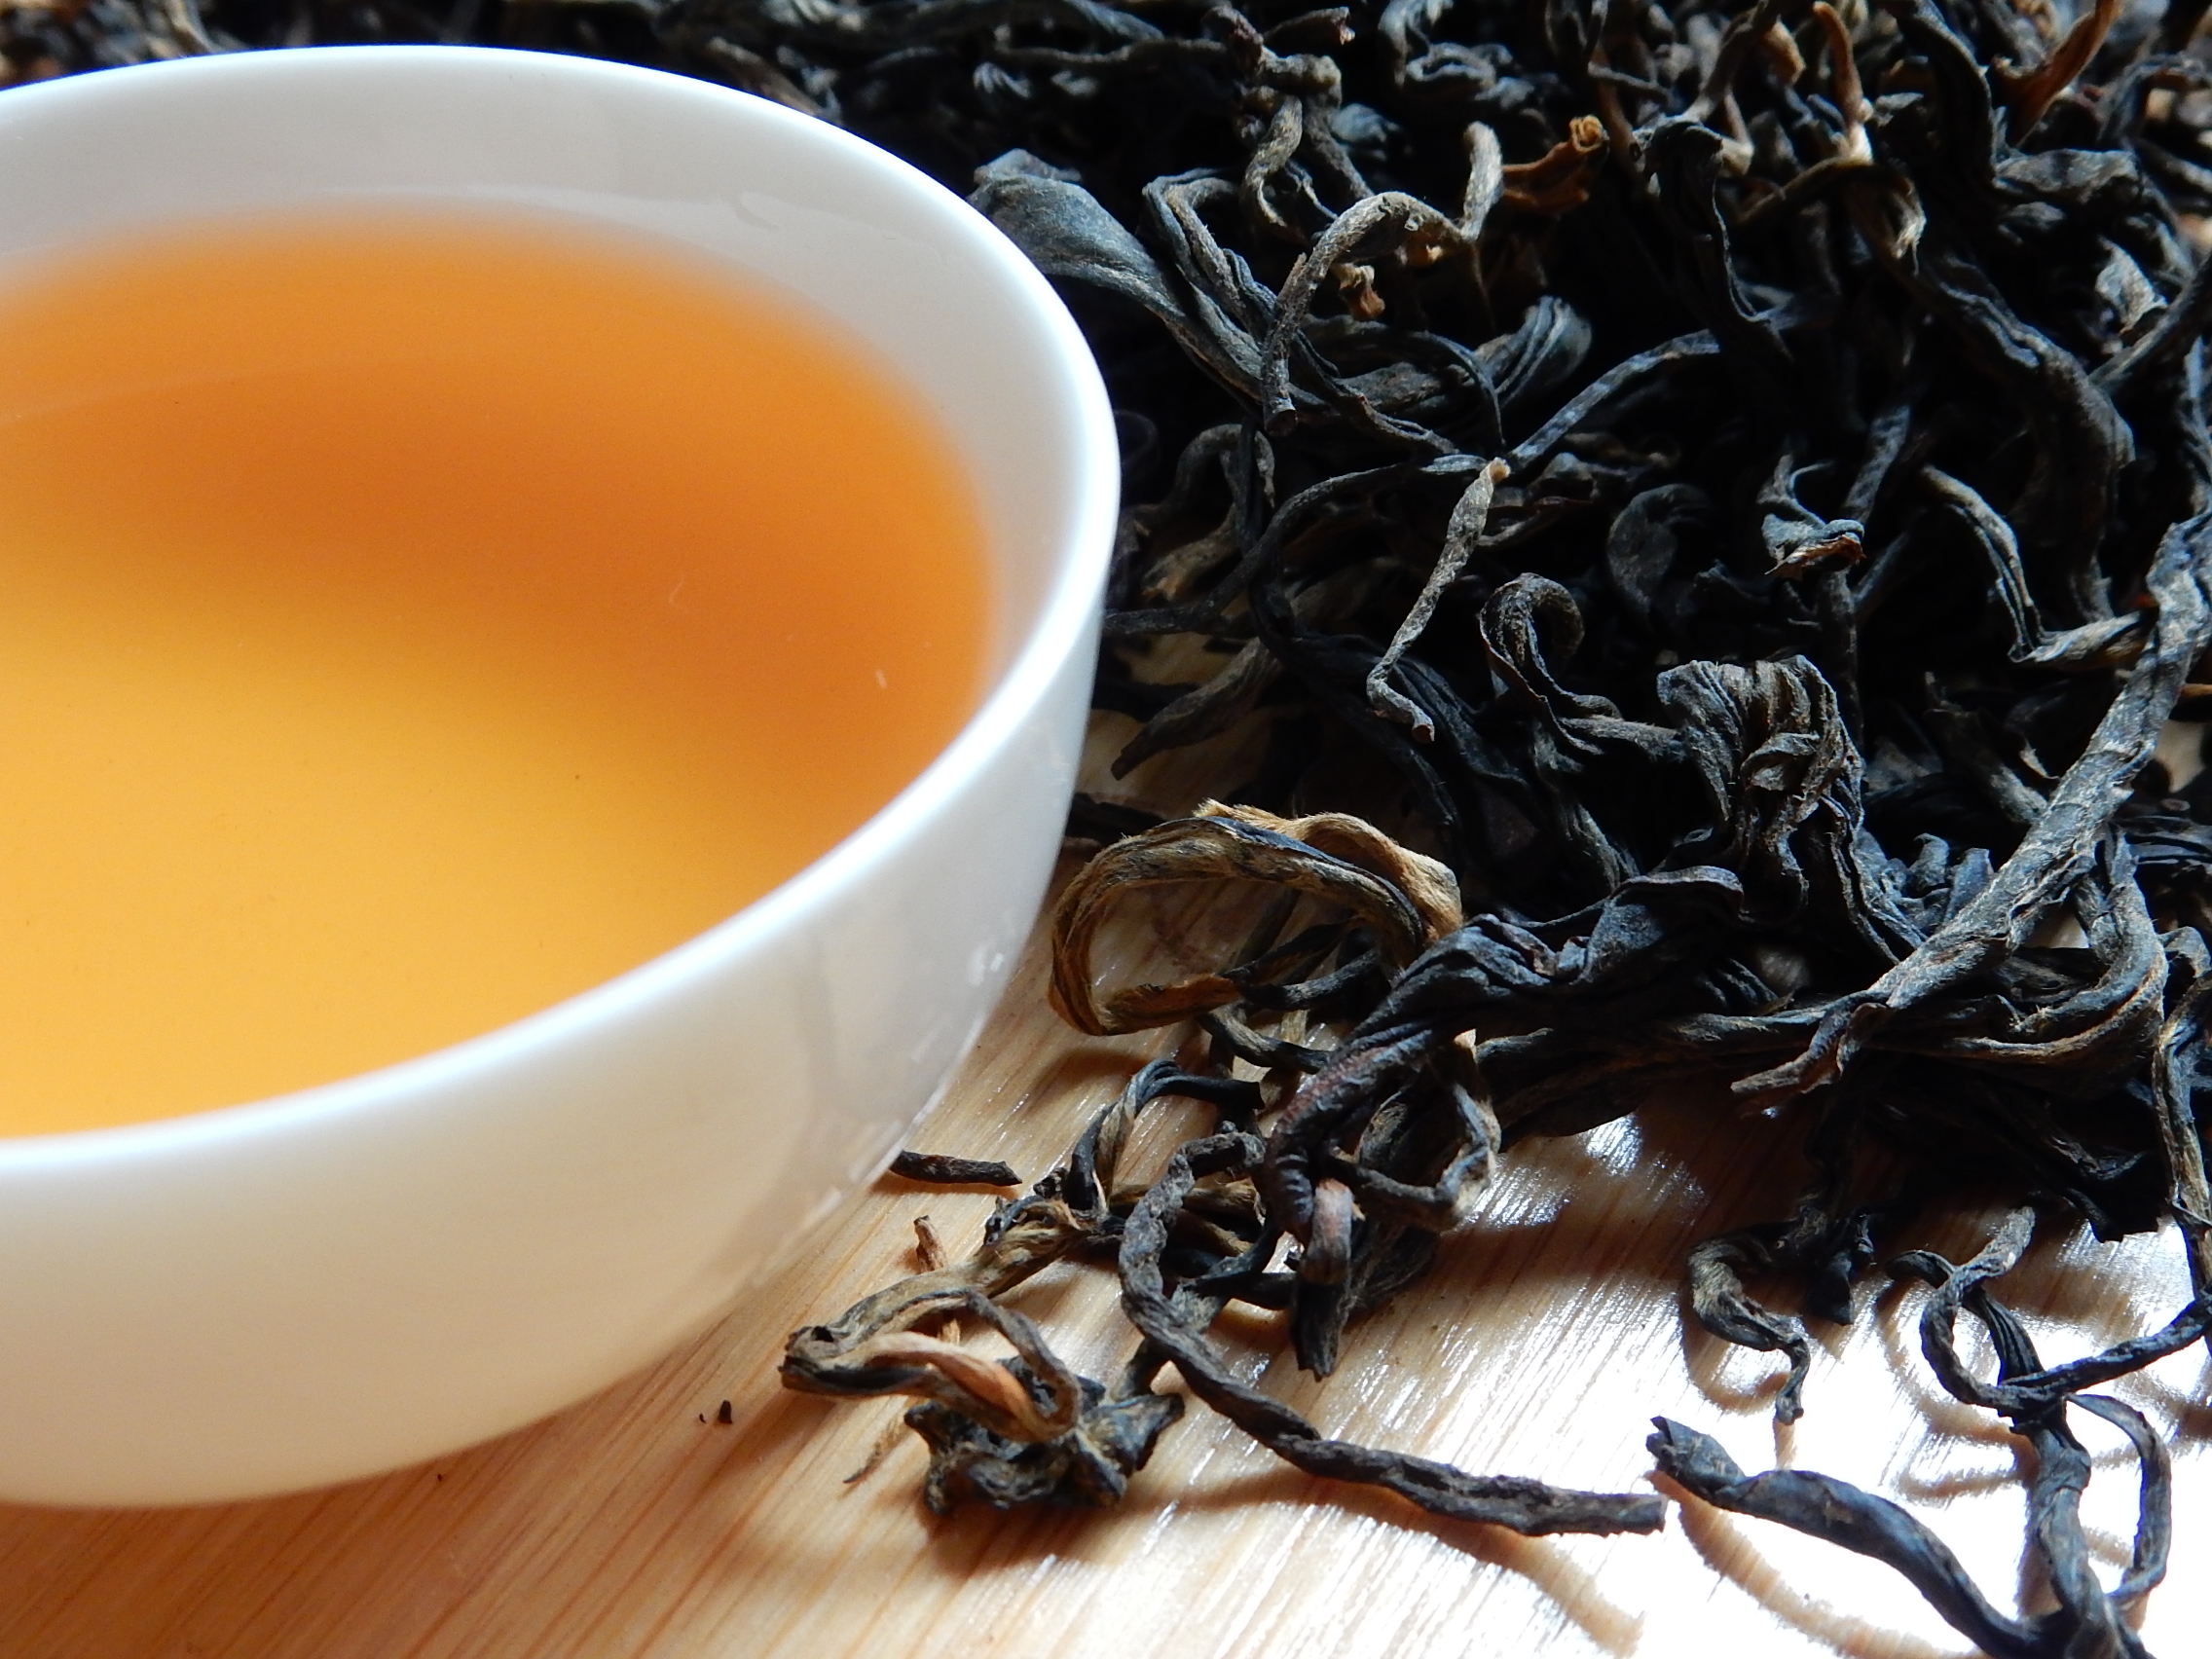 Comparing the flavor characteristics of Yunnan Gushugong Yunnan black tea, alpine purple black tea, Zhengshan race and red jade black tea, which black tea has a higher ratio of performance to price?